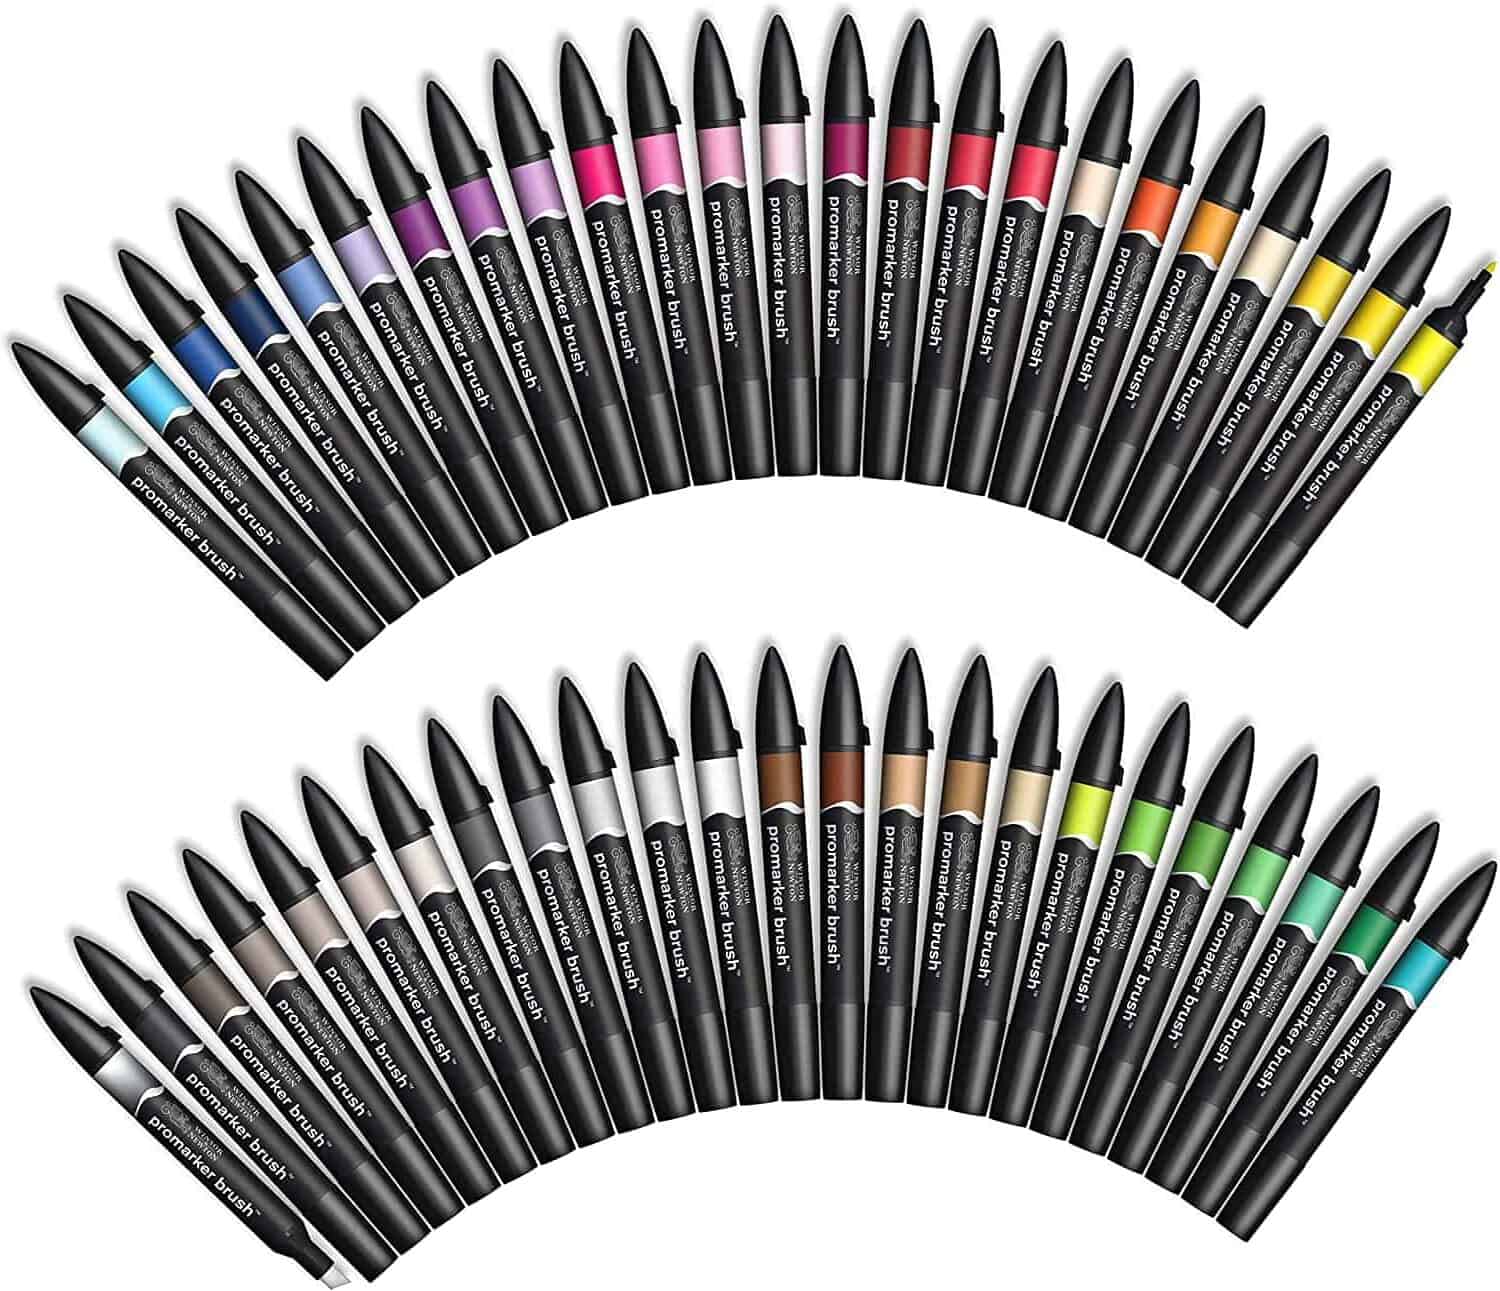 Winsor newton pro markers, alcohol marker set, permanent markers